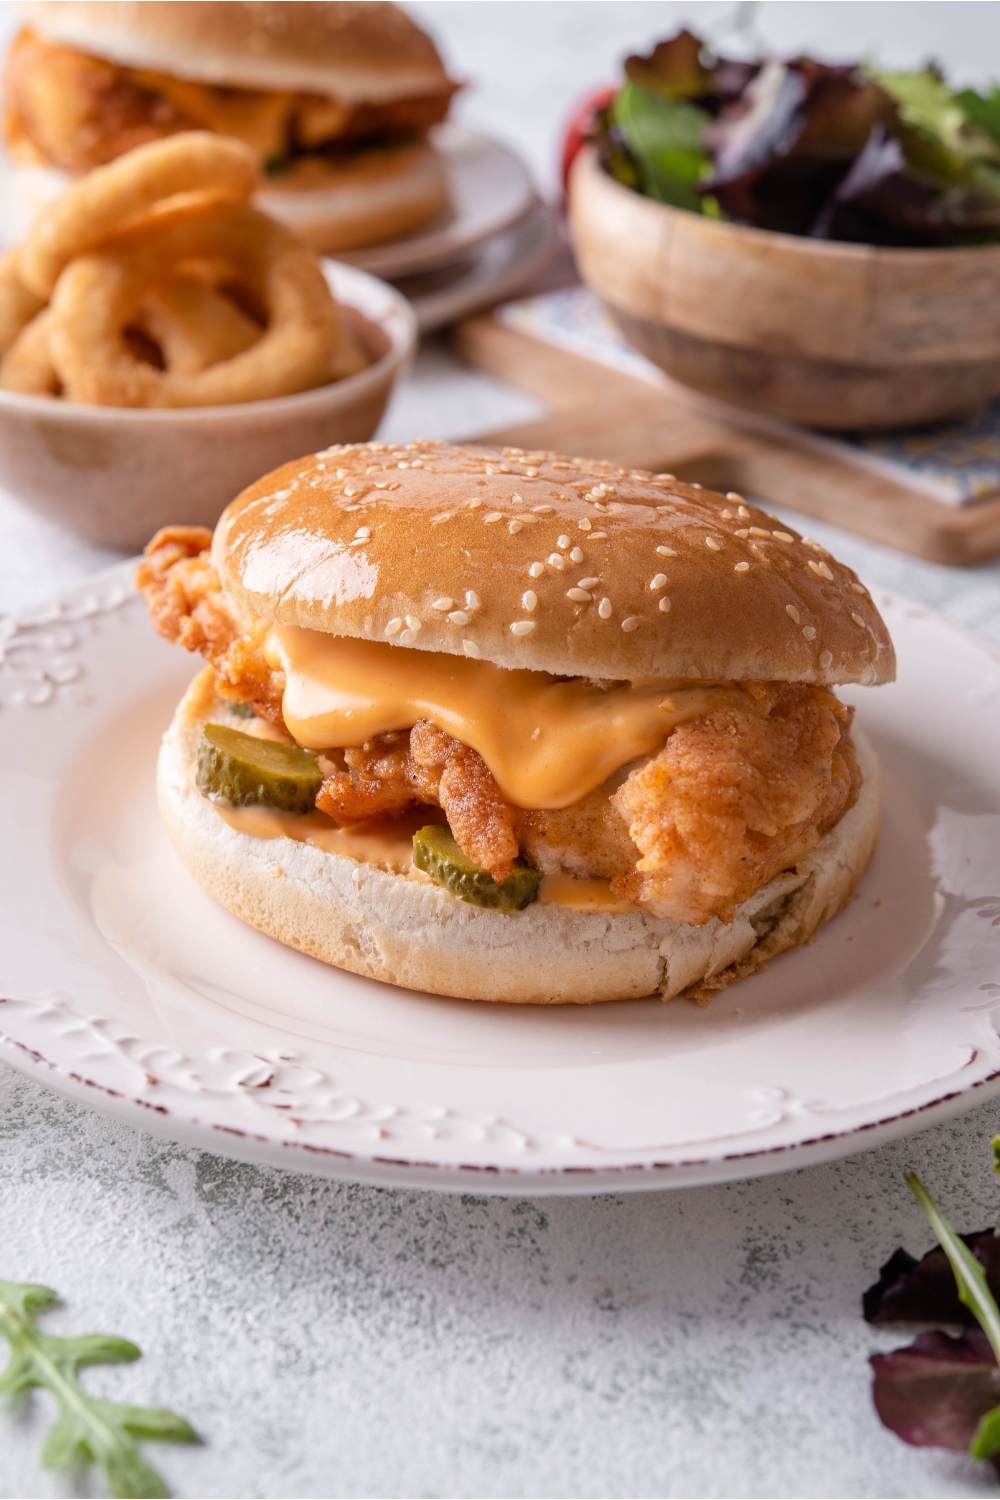 A fried chicken sandwich with spicy mayonnaise and pickles in a sesame seed bun. There is a second sandwich, a bowl of salad, and a bowl of onion rings in the background.